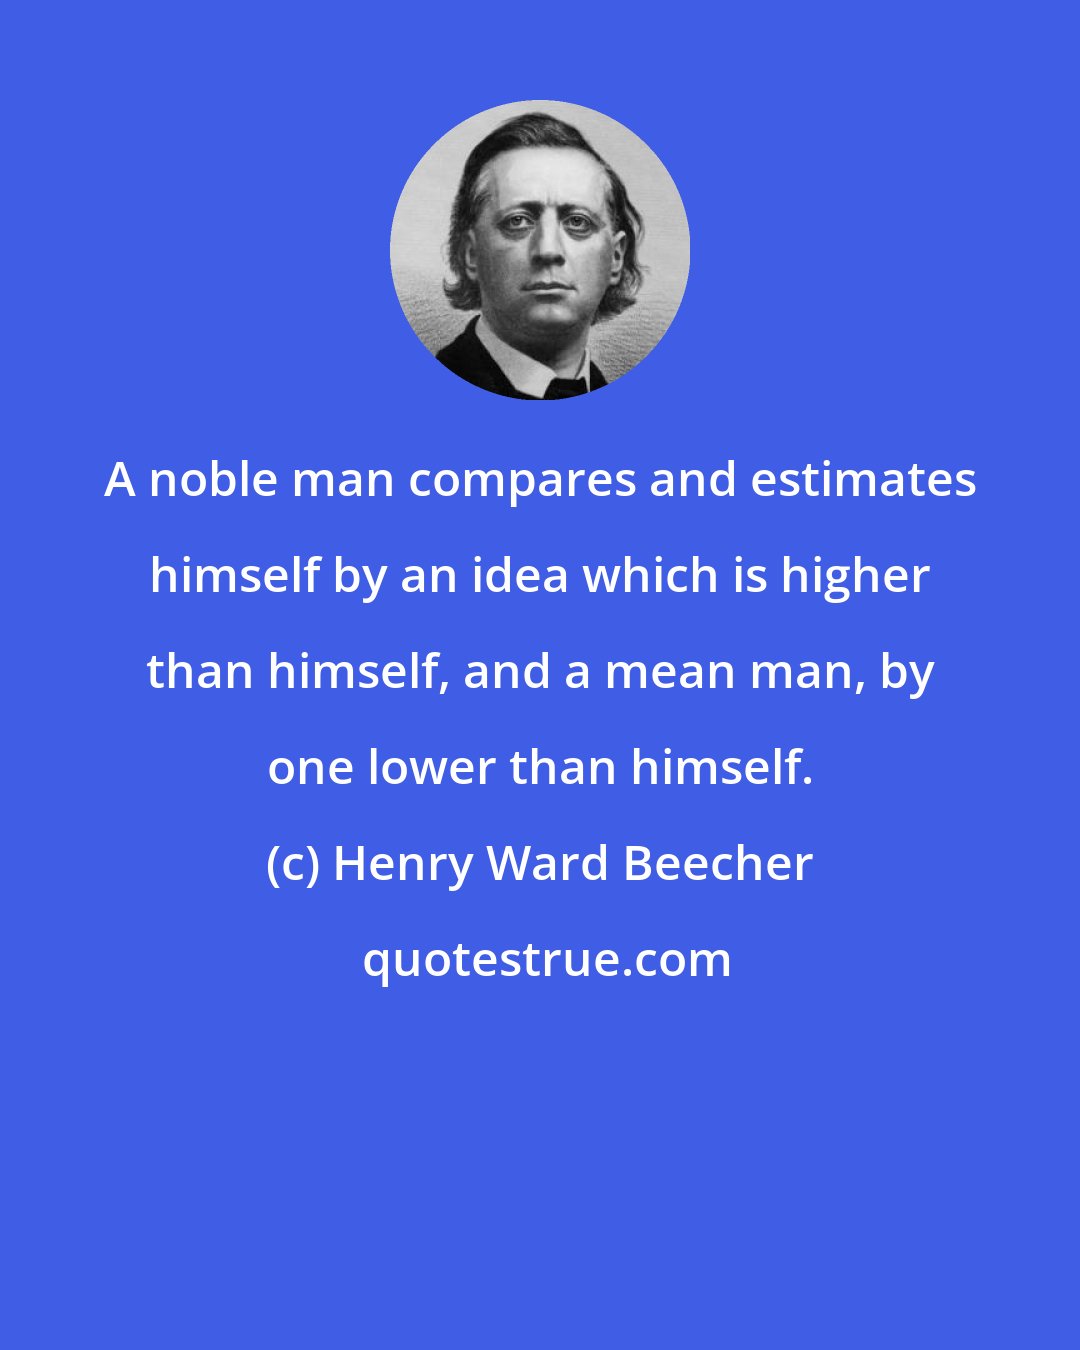 Henry Ward Beecher: A noble man compares and estimates himself by an idea which is higher than himself, and a mean man, by one lower than himself.